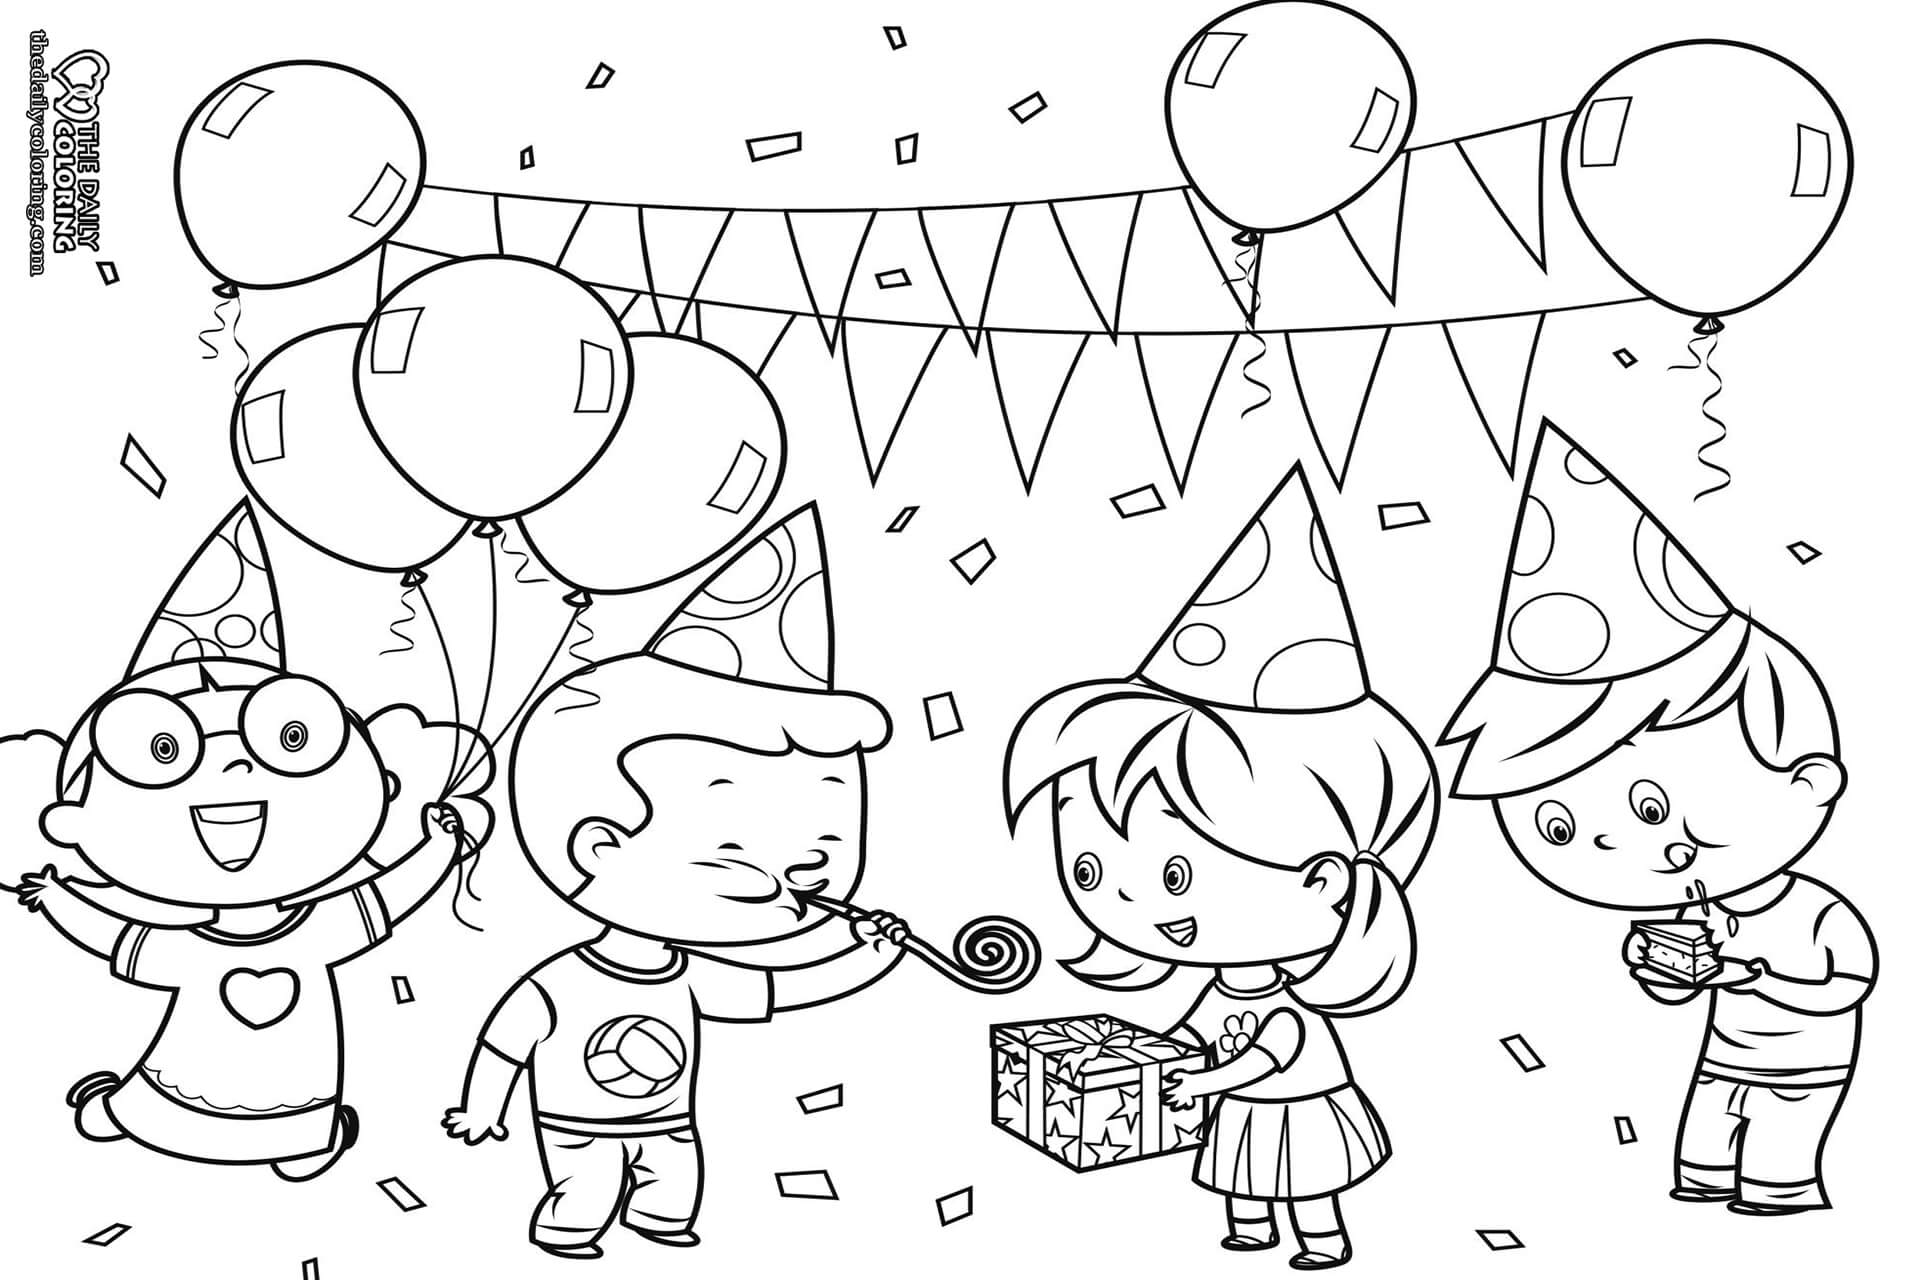 Party Coloring Page - The Daily Coloring